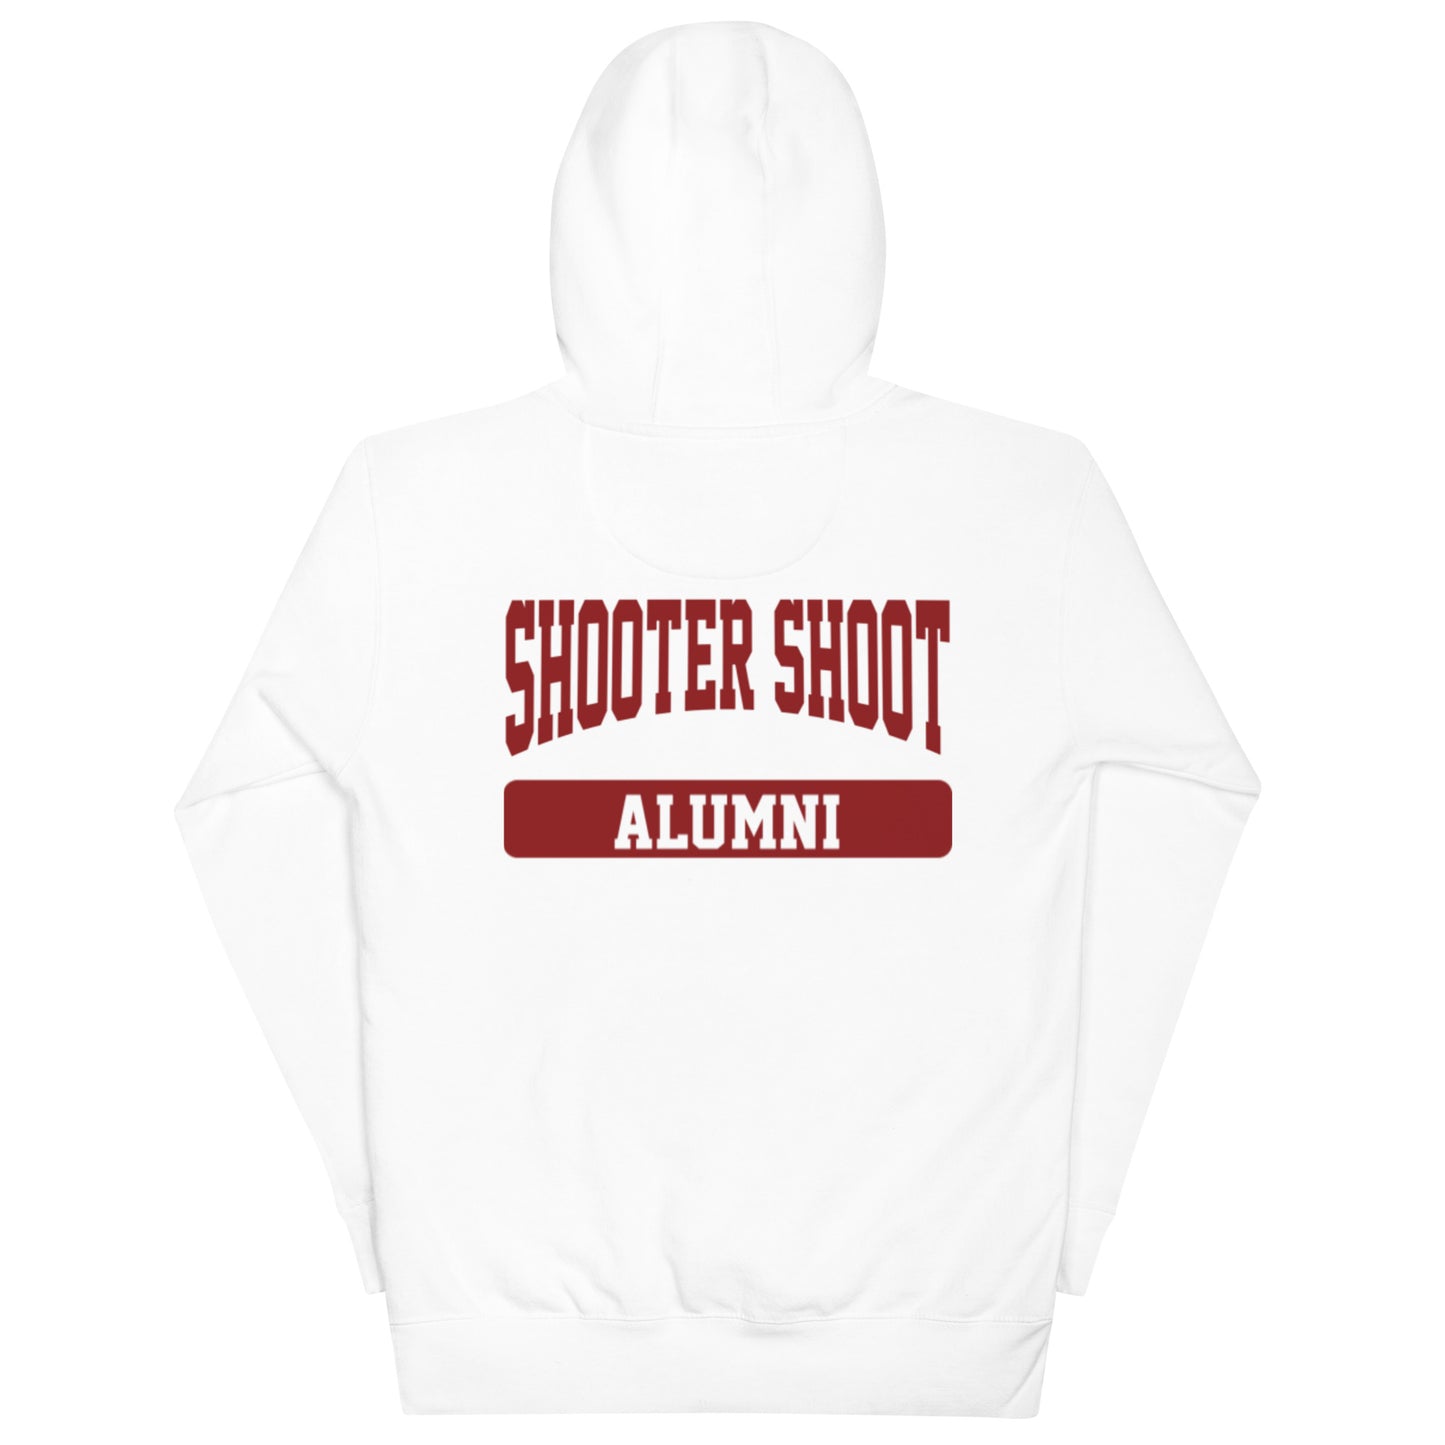 Elite Shooter Shoot (Limited Edition)